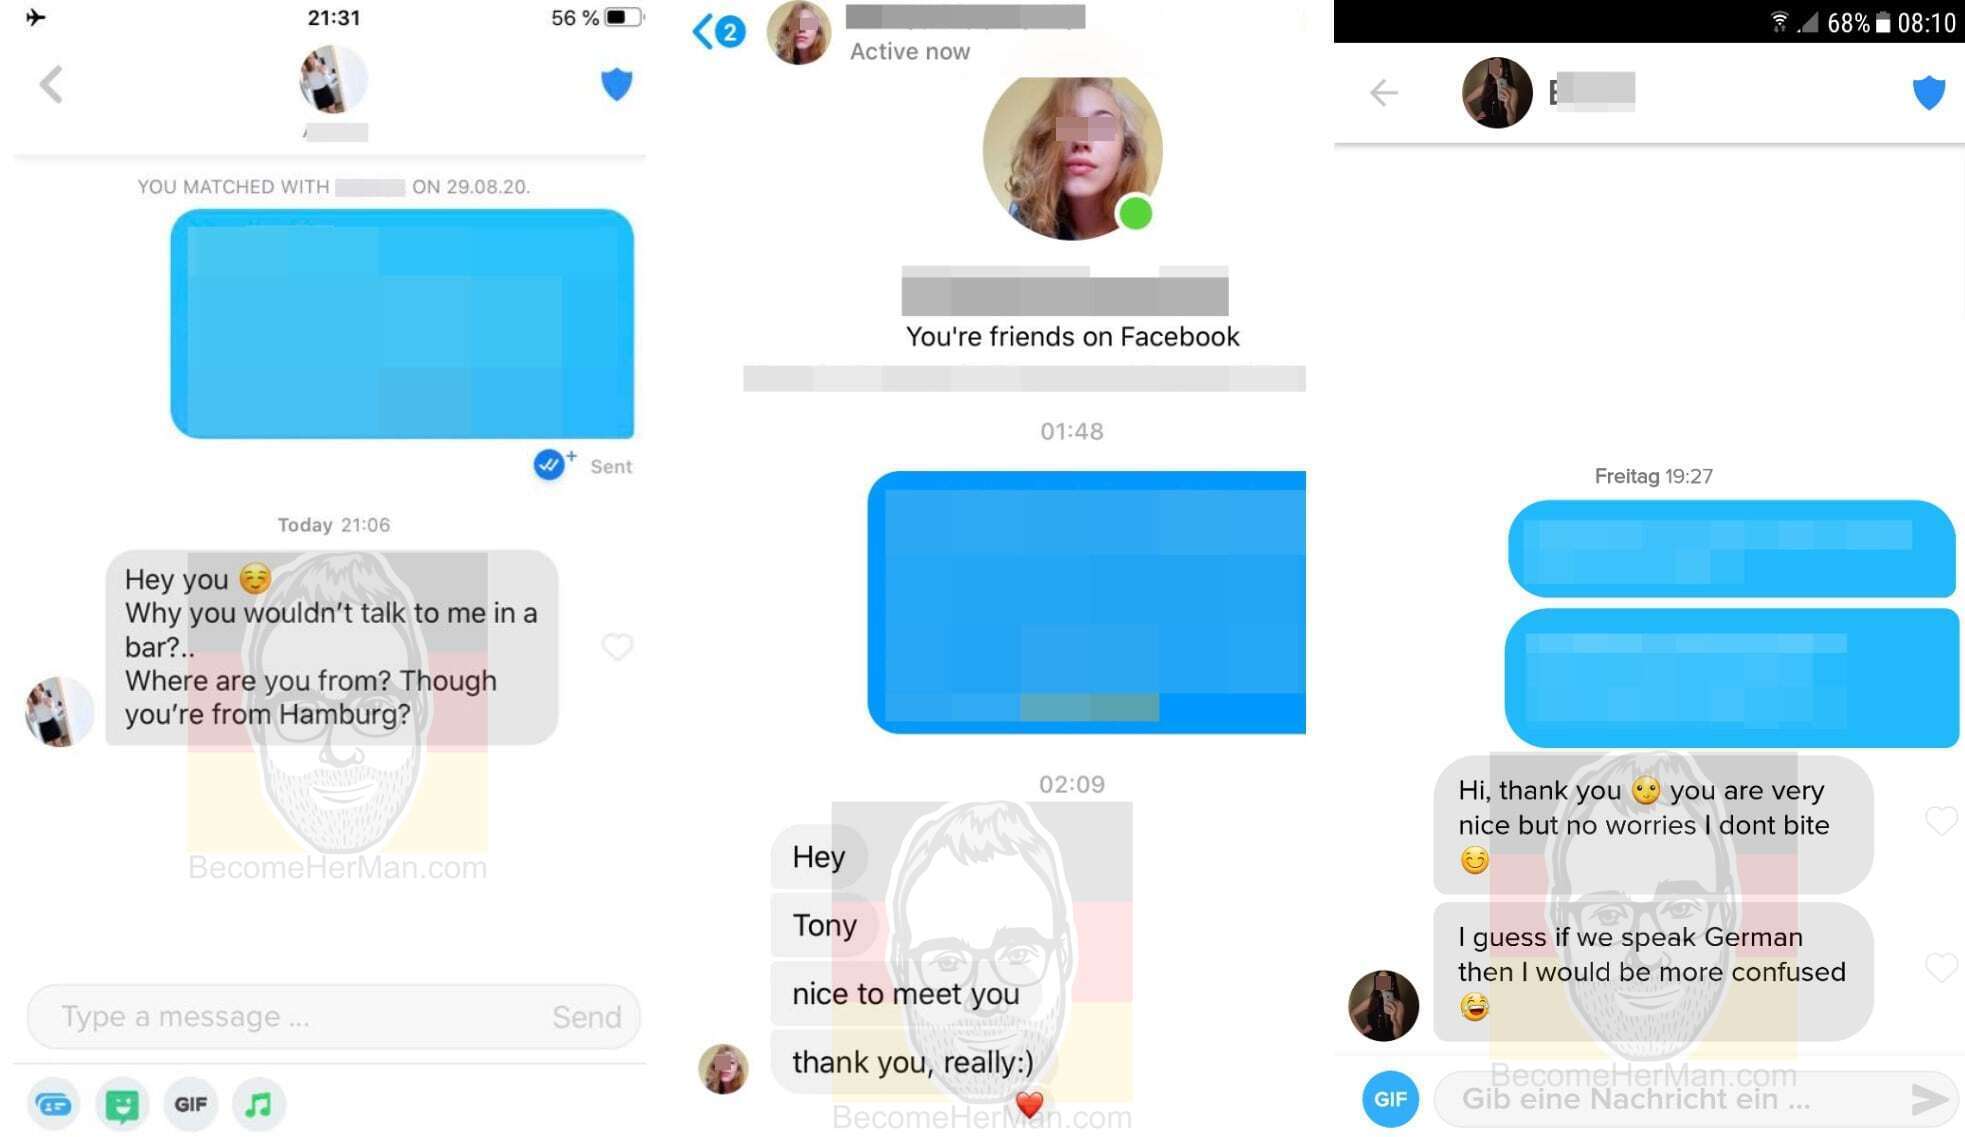 Examples of how to start a conversation on Tinder